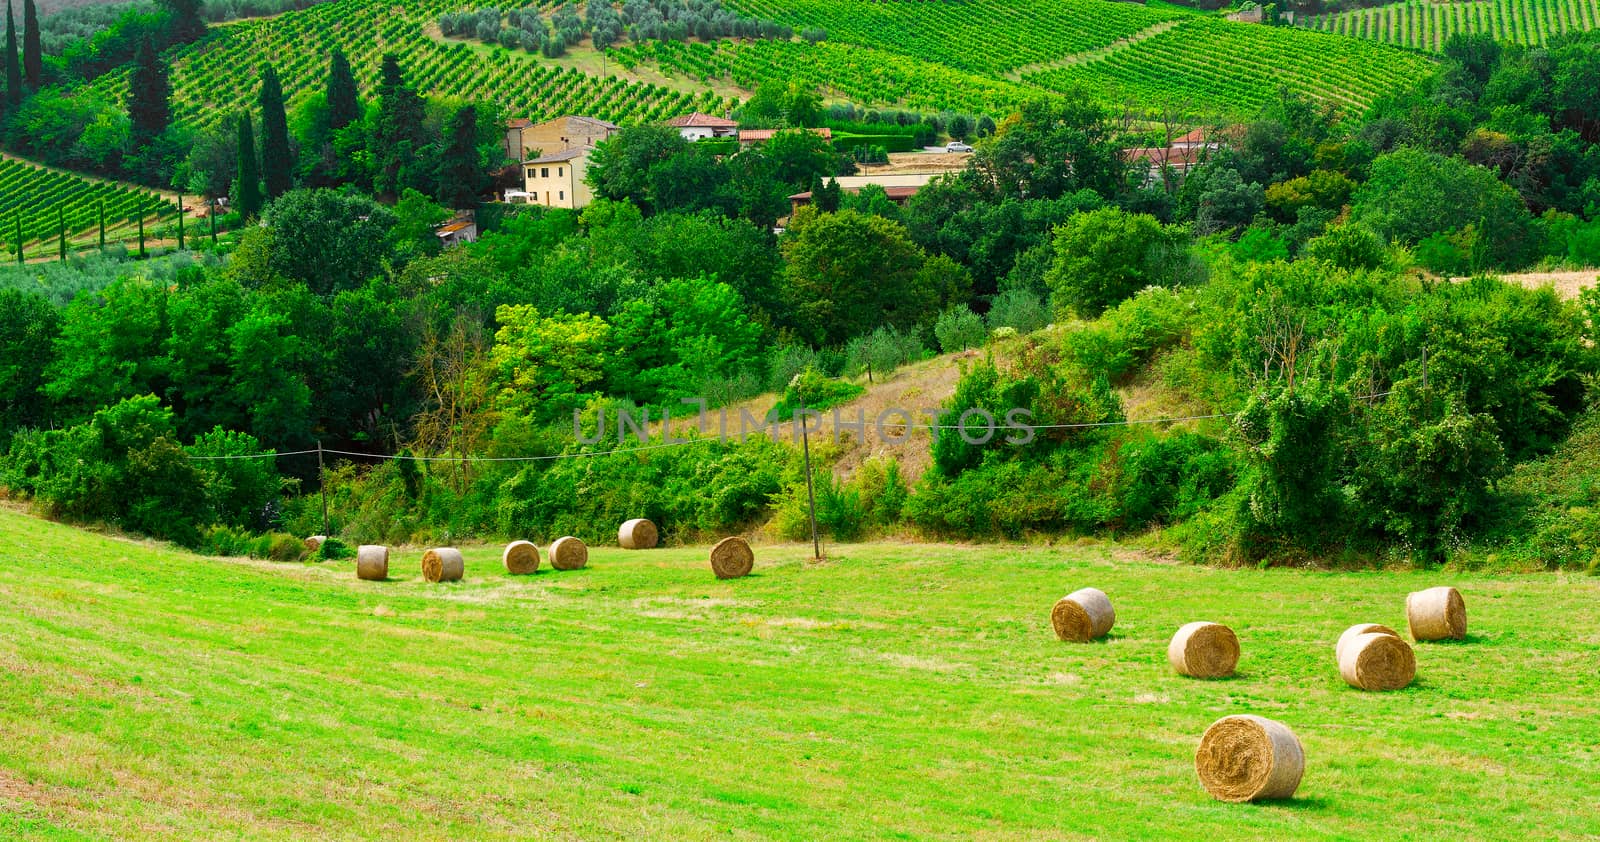 Landscape with Many Hay Bales and Vineyard